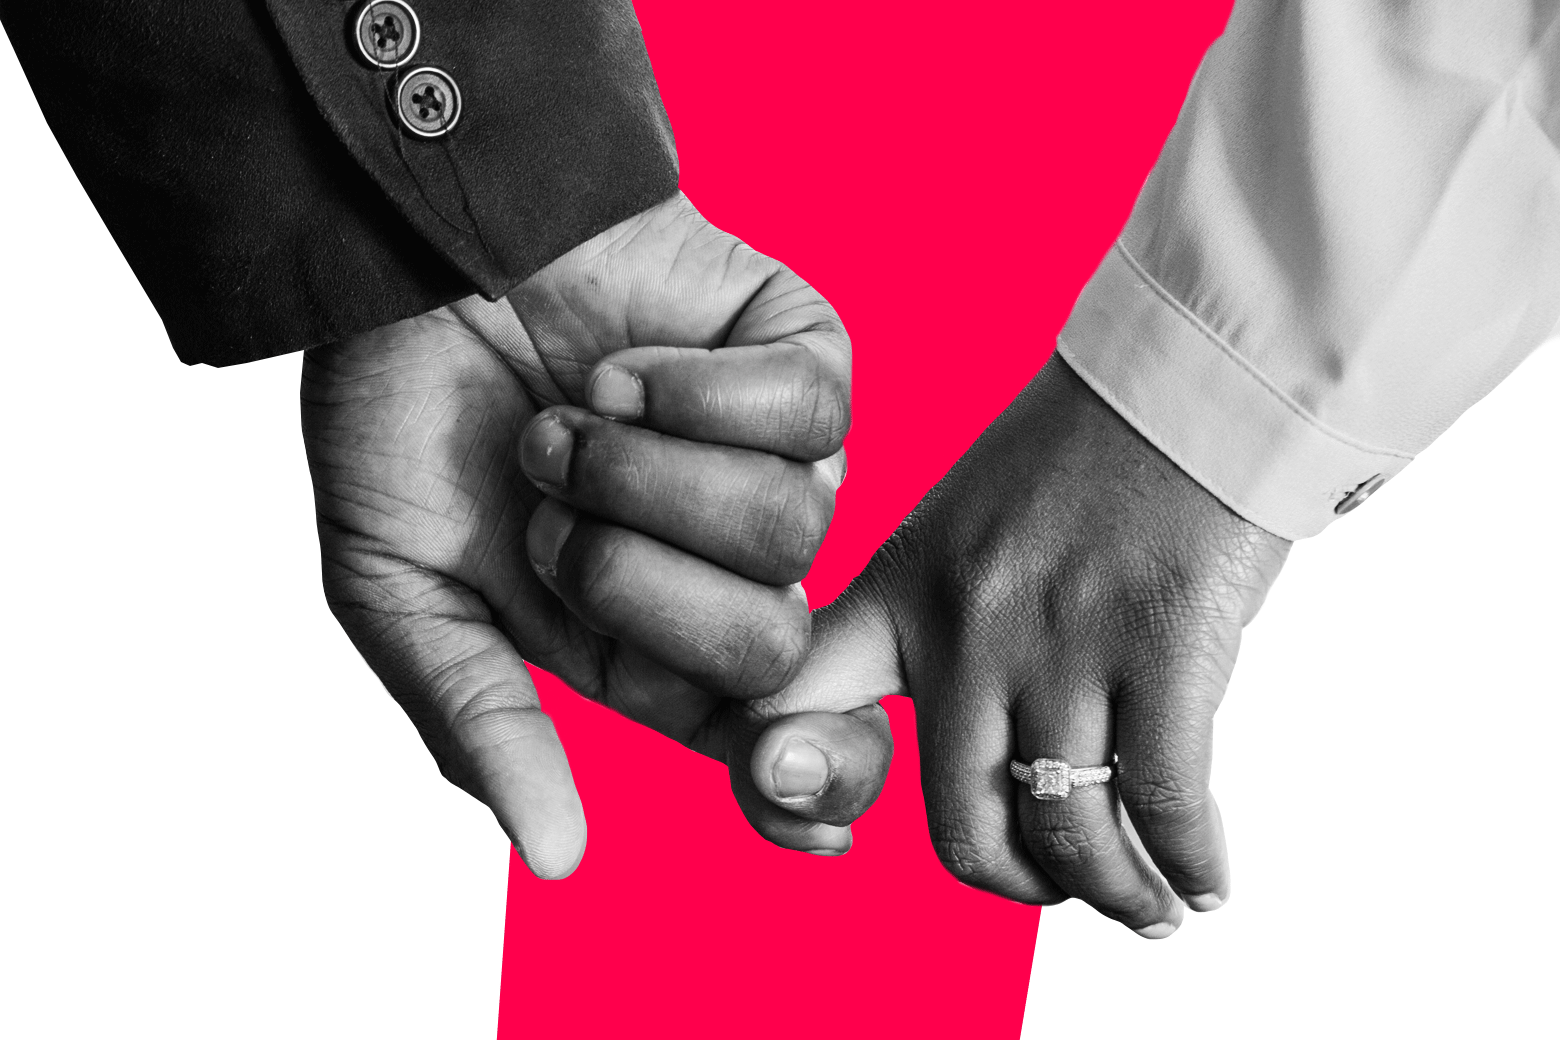 Man and woman with engagement ring loosely holding hands.